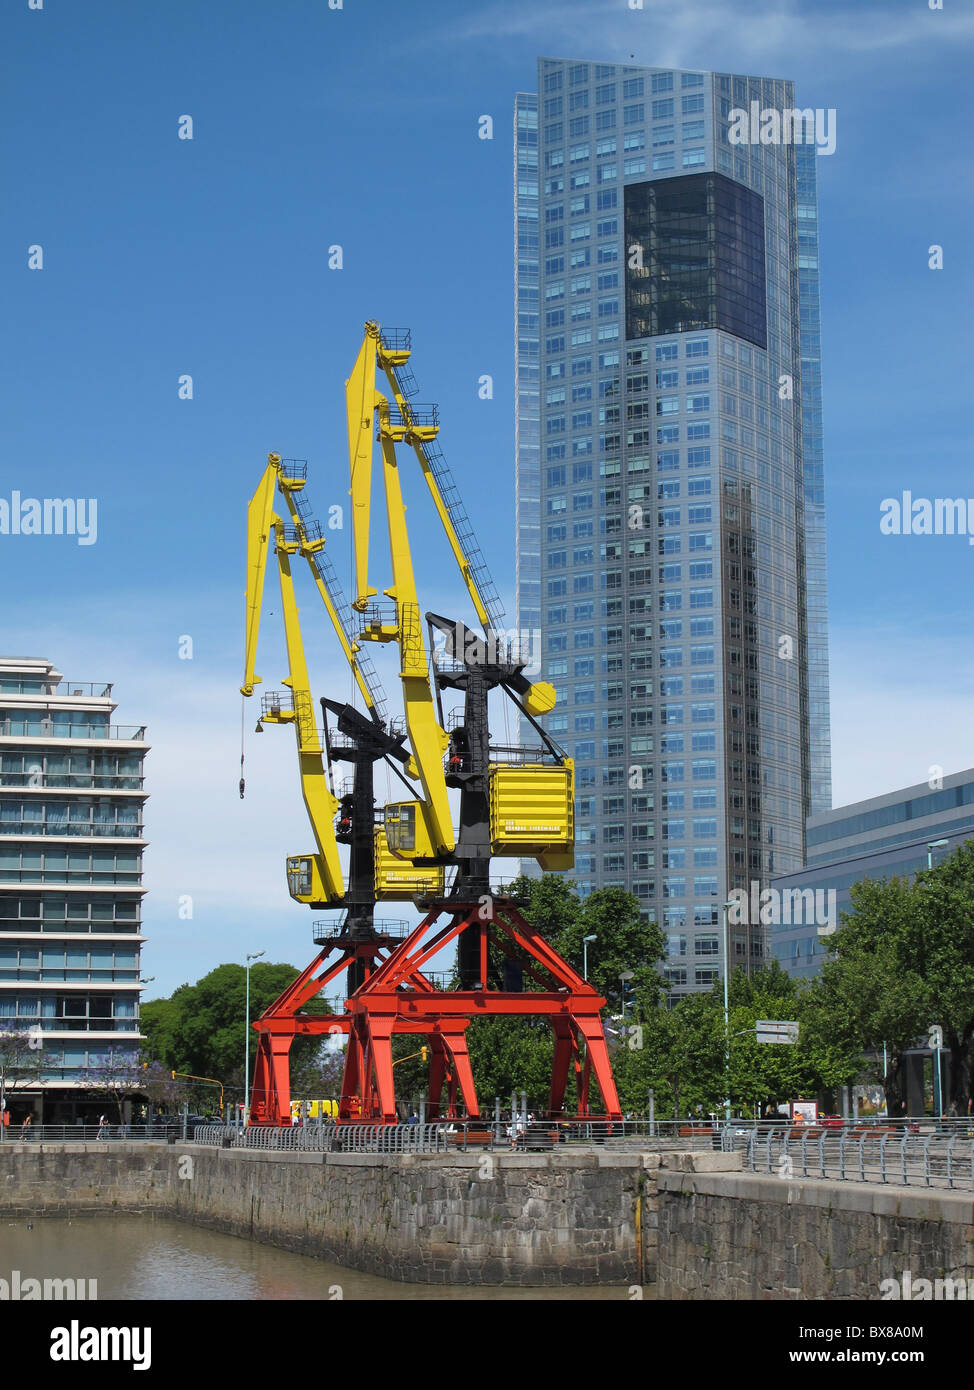 Old restored cranes and modern buildings with glass facades, Puerto Madero, Buenos Aires, Argentina Stock Photo